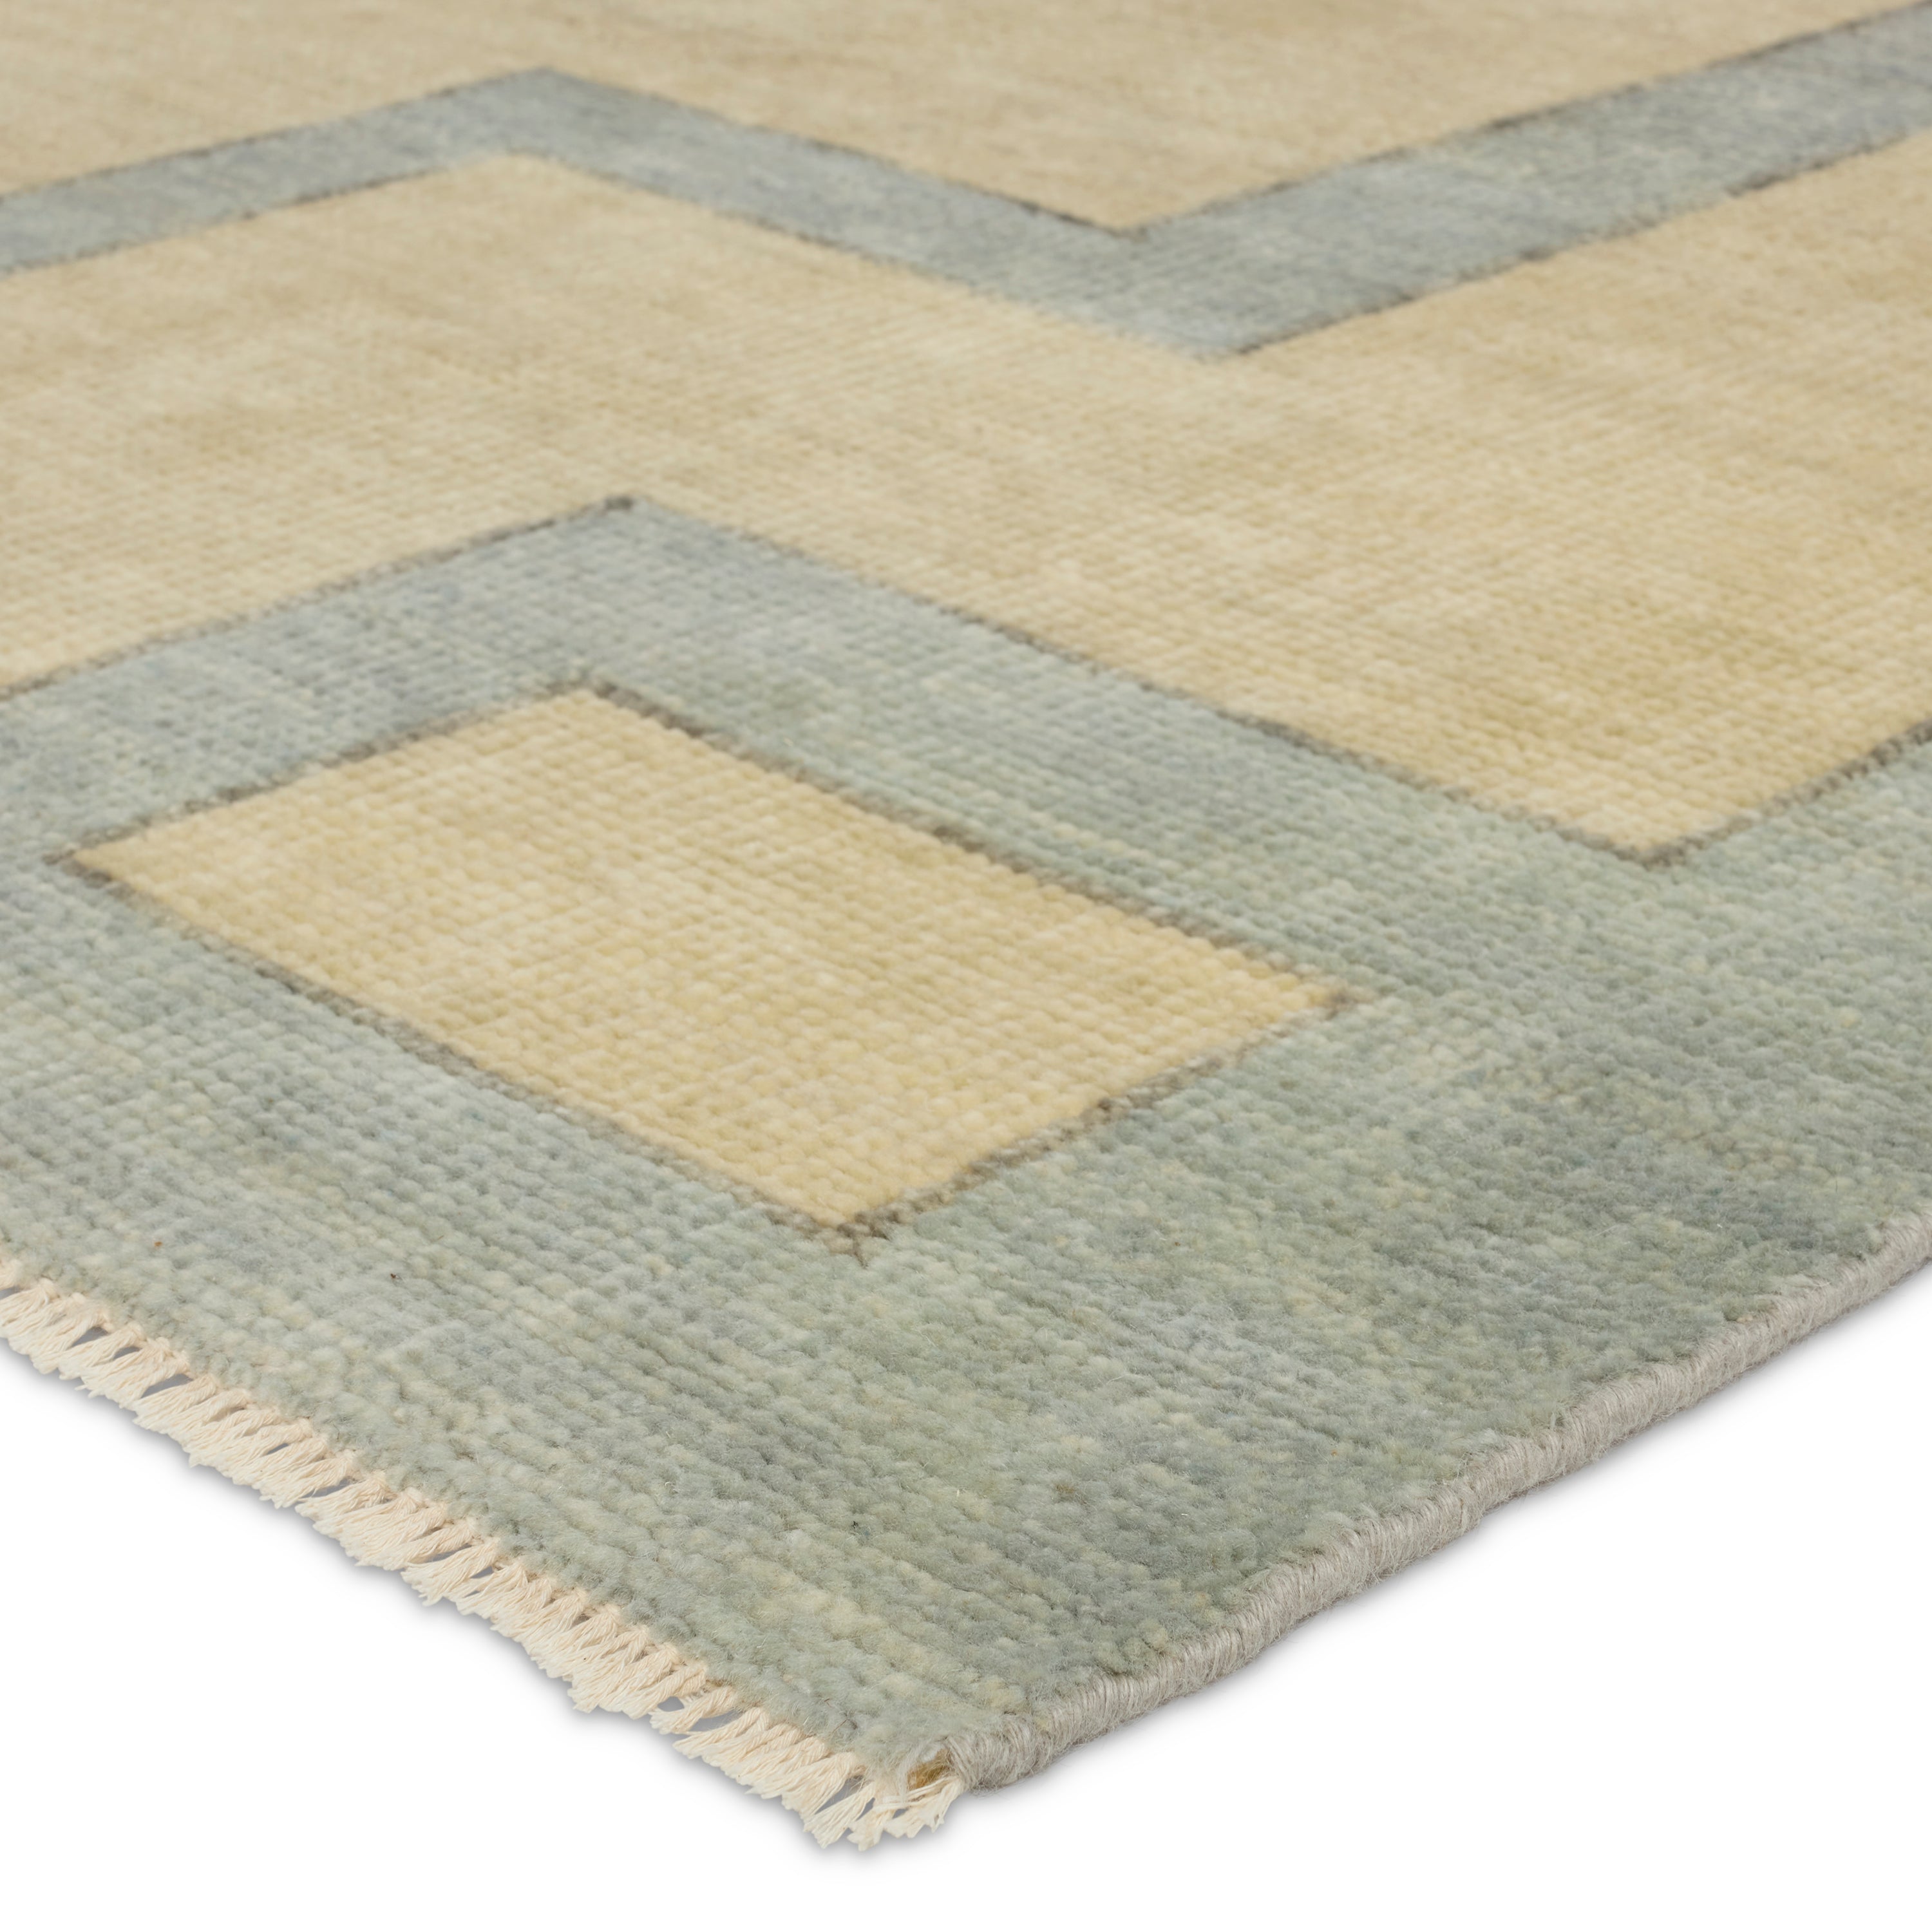 The hand-knotted Cyprus collection showcases a modern representation of vintage Kars designs with clean-lined geometric details and fresh colorways. The blue, cream, gray, and caramel colored Nicosia design delights with a minimalistic medallion pattern and multiple borders. Low pile and naturally stain resistant fibers allow for easy care and cleanup. Amethyst Home provides interior design, new construction, custom furniture, and area rugs in the Tampa metro area.